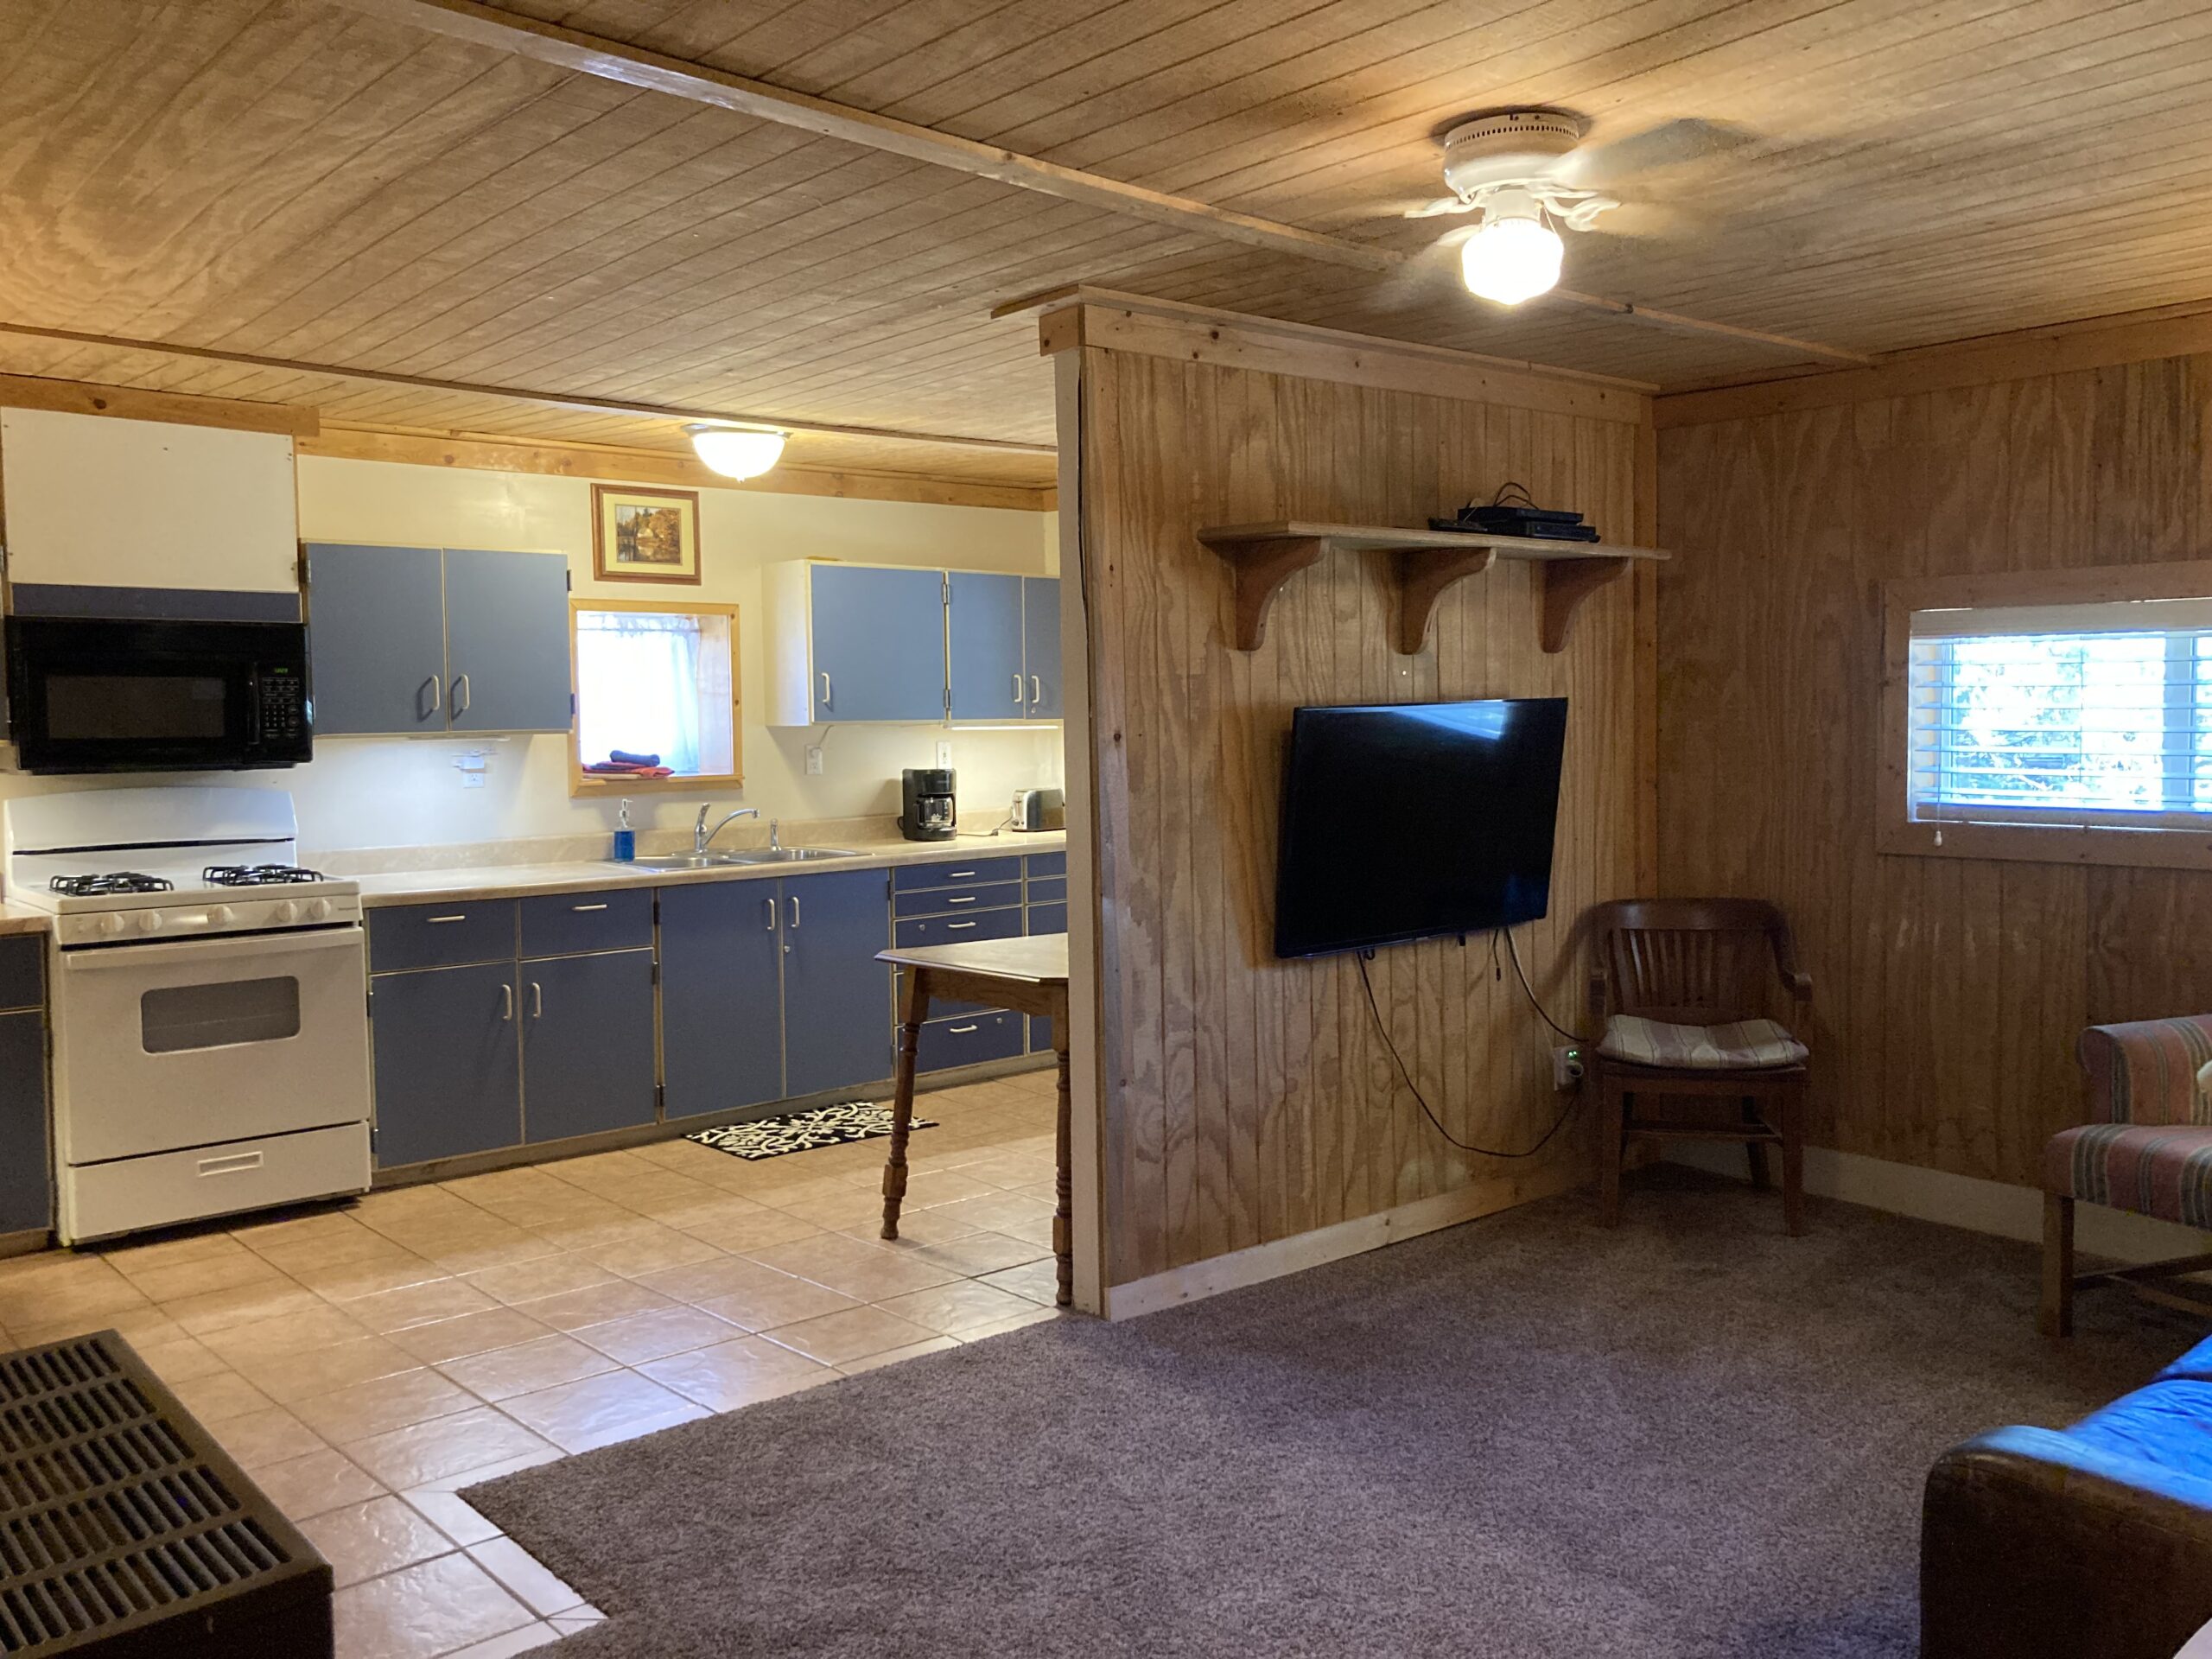 Cabin has full kitchen and living room